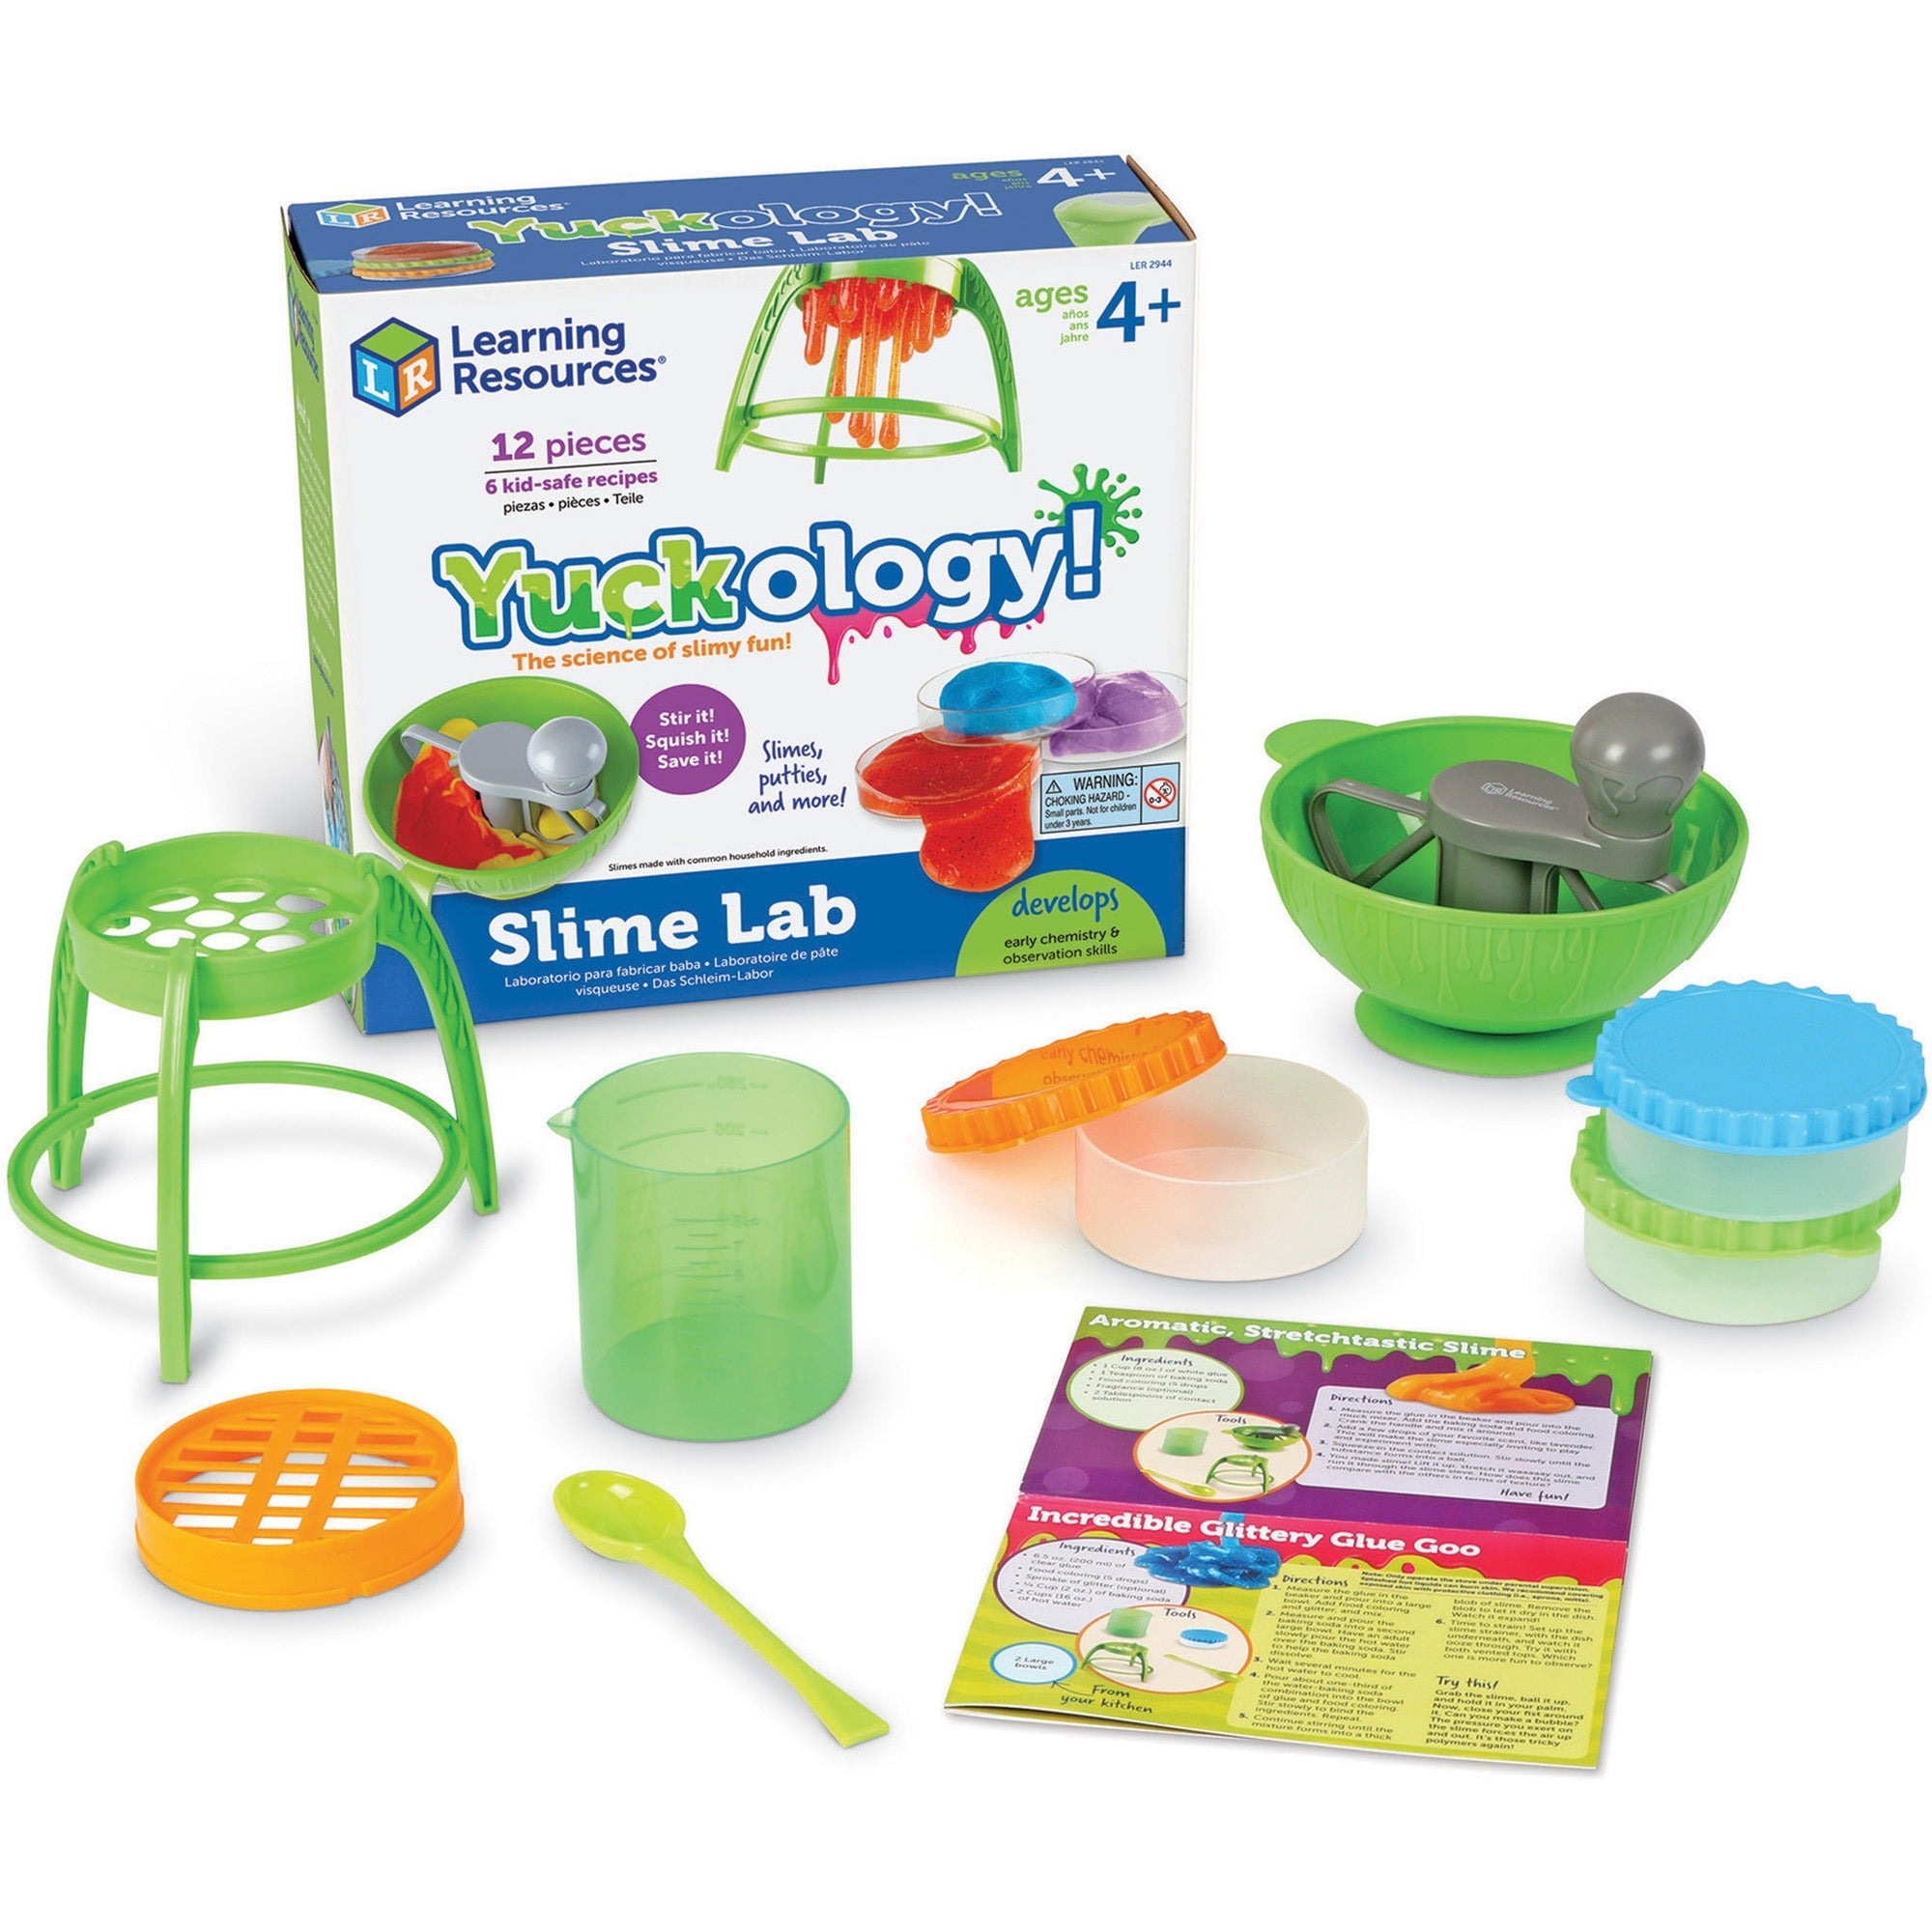 learning-resources-yuckology!-slime-lab-theme-subject-learning-skill-learning-science-technology-mathematics-engineering-science-experiment-4-8-year-1-set_lrnler2944 - 1